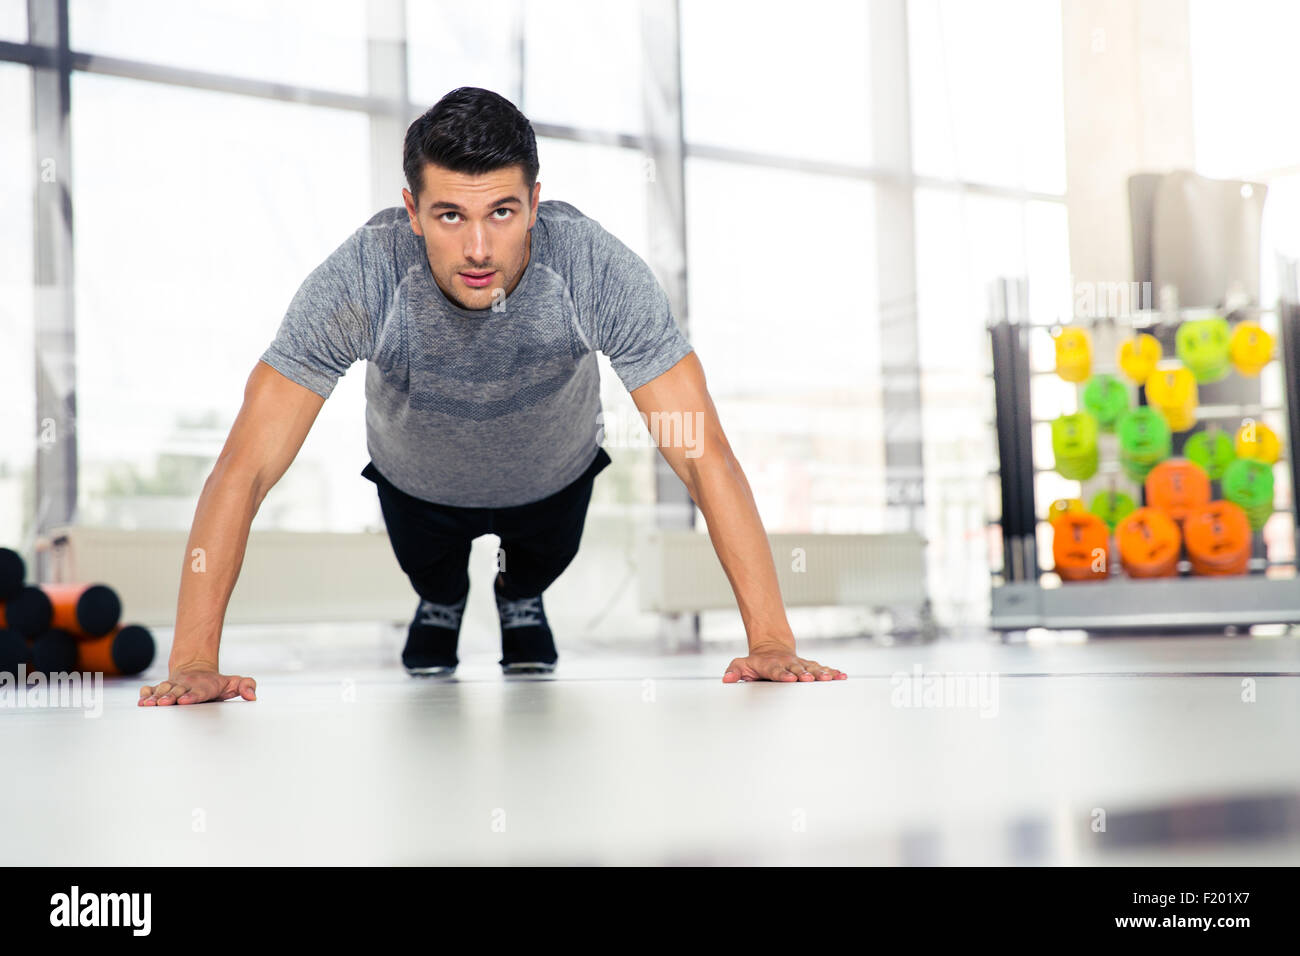 Portrait of a fitness man doing push-ups in gym Stock Photo